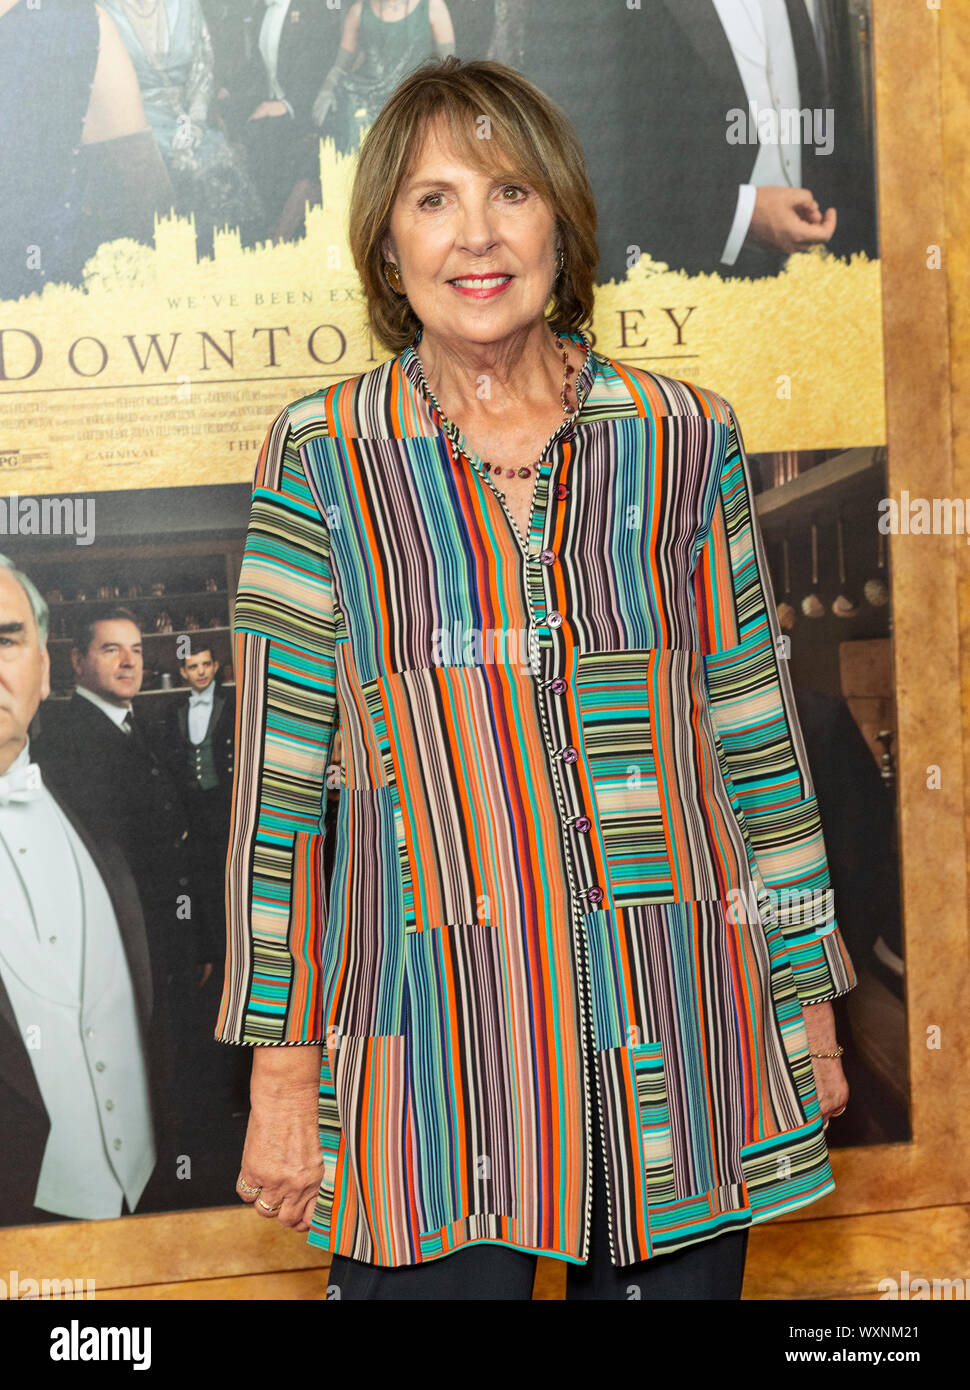 New York, United States. 16th Sep, 2019. Penelope Wilton attends the 'Downton Abbey' New York premiere at Alice Tully Hall Lincoln Center (Photo by Lev Radin/Pacific Press) Credit: Pacific Press Agency/Alamy Live News Stock Photo